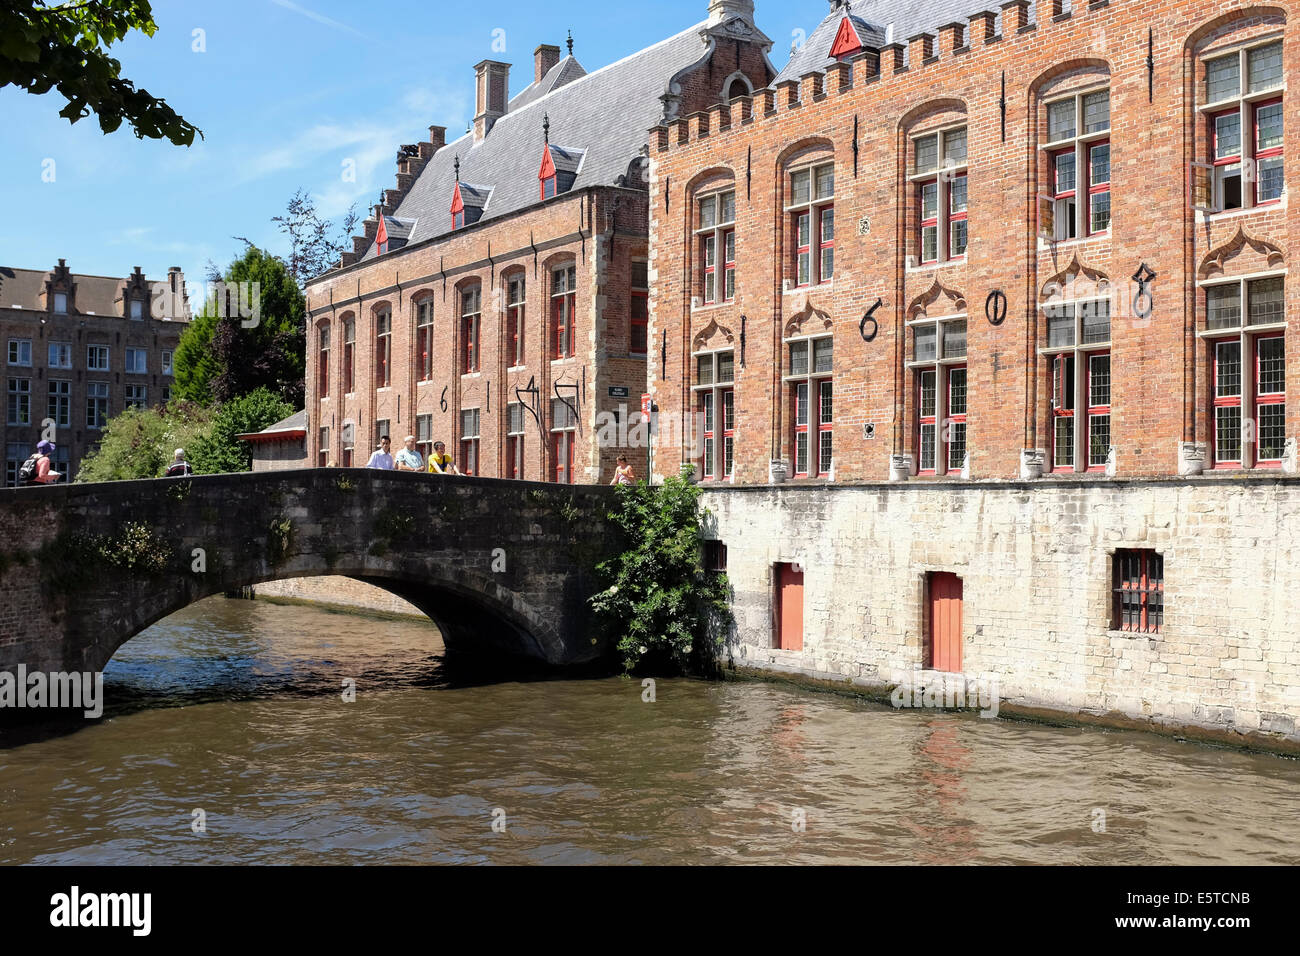 Historical buildings in the canals of Bruges, Belgium Stock Photo